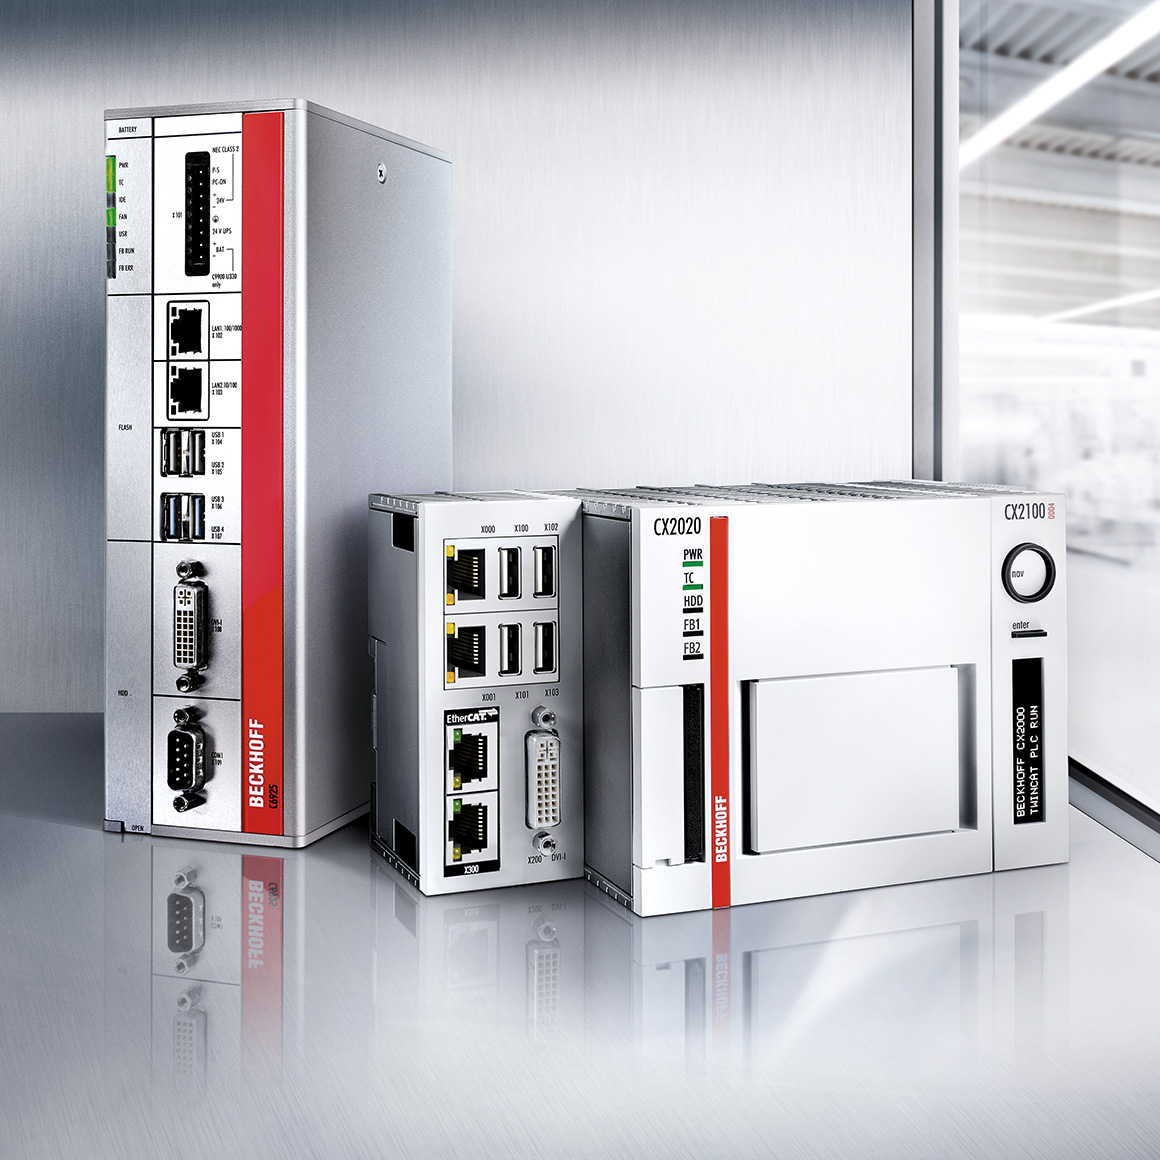 The Beckhoff Industrial PCs: highly scalable, with variable configuration and customizable 